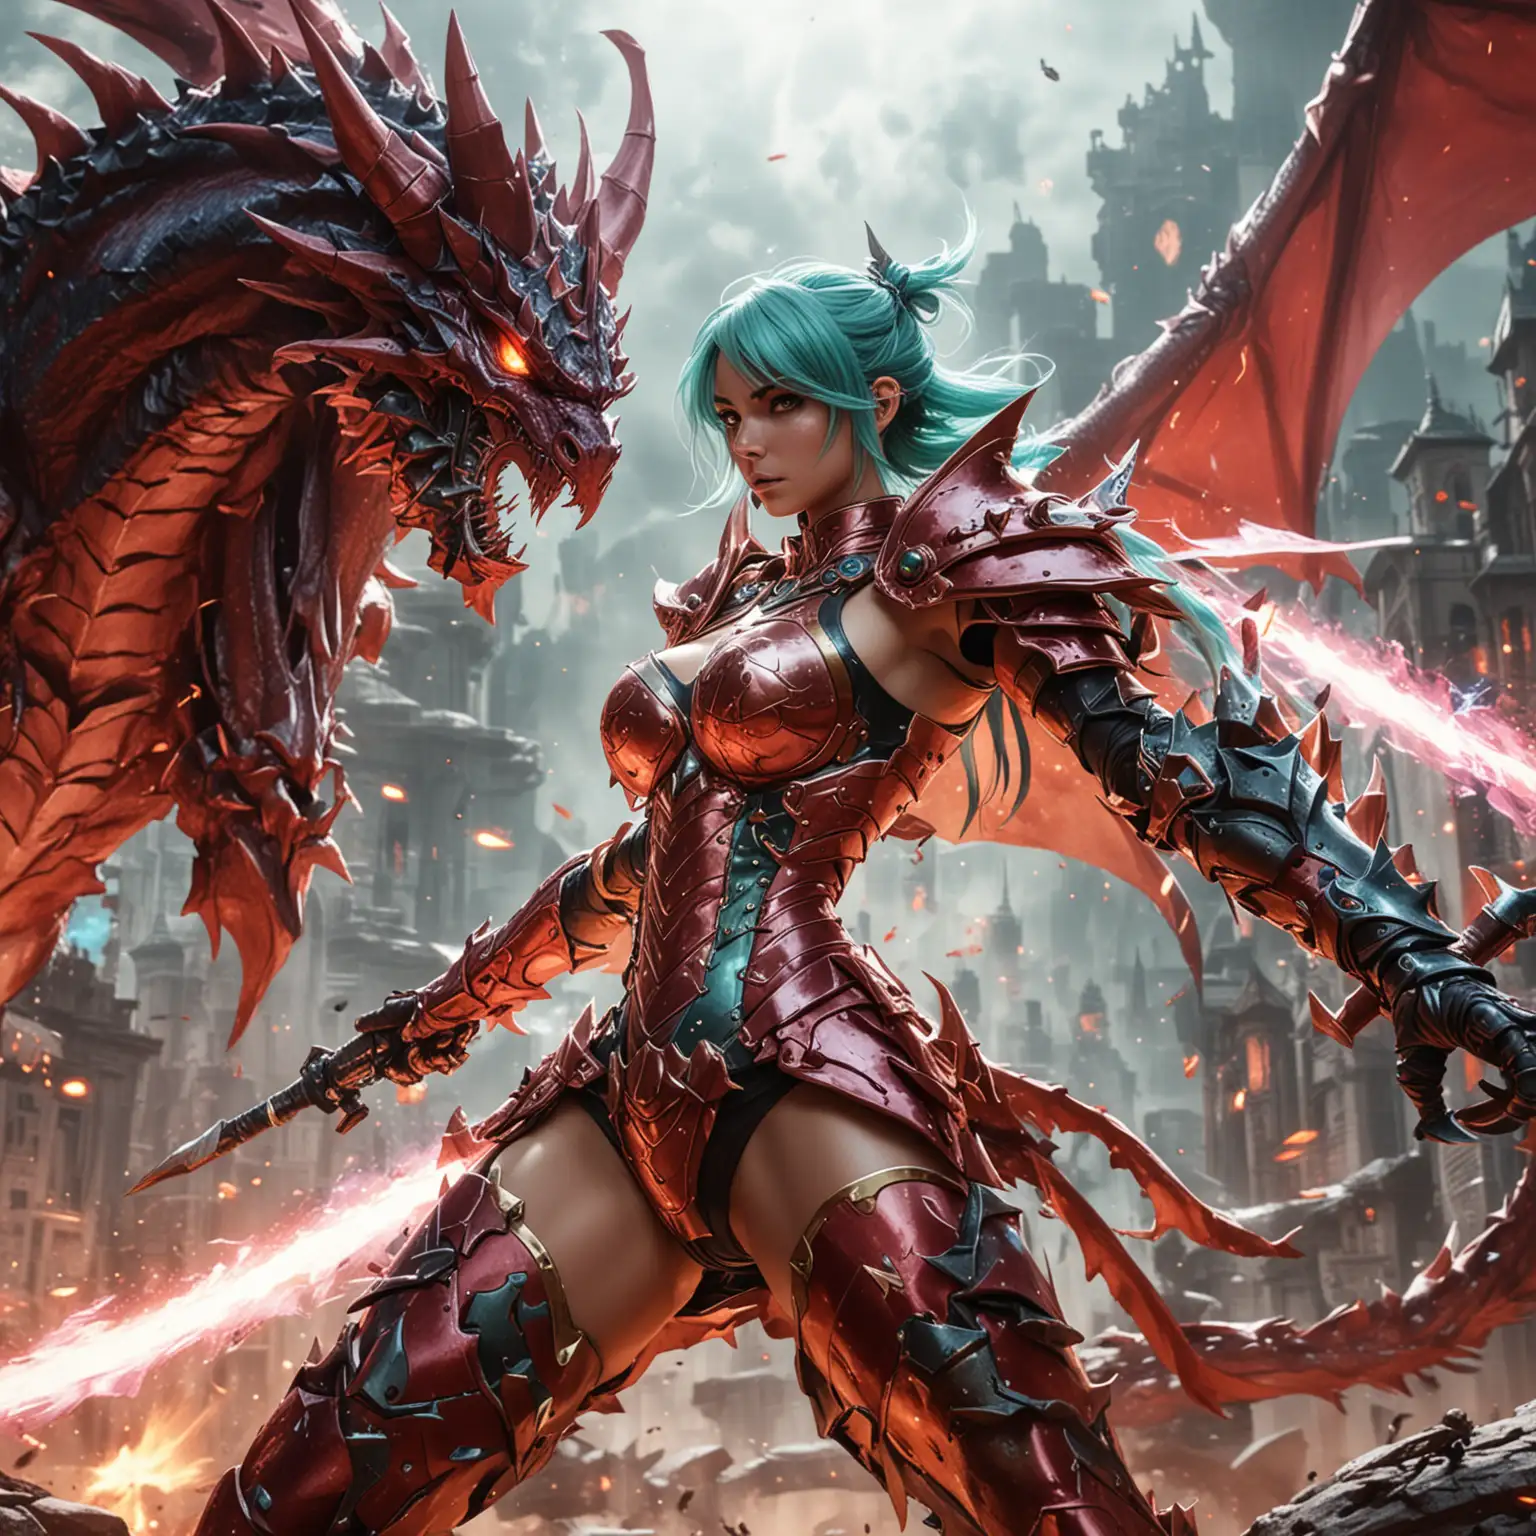 female paladin in shiny skimpy armor seen from the back fighting a giant dragon that is towering over her
